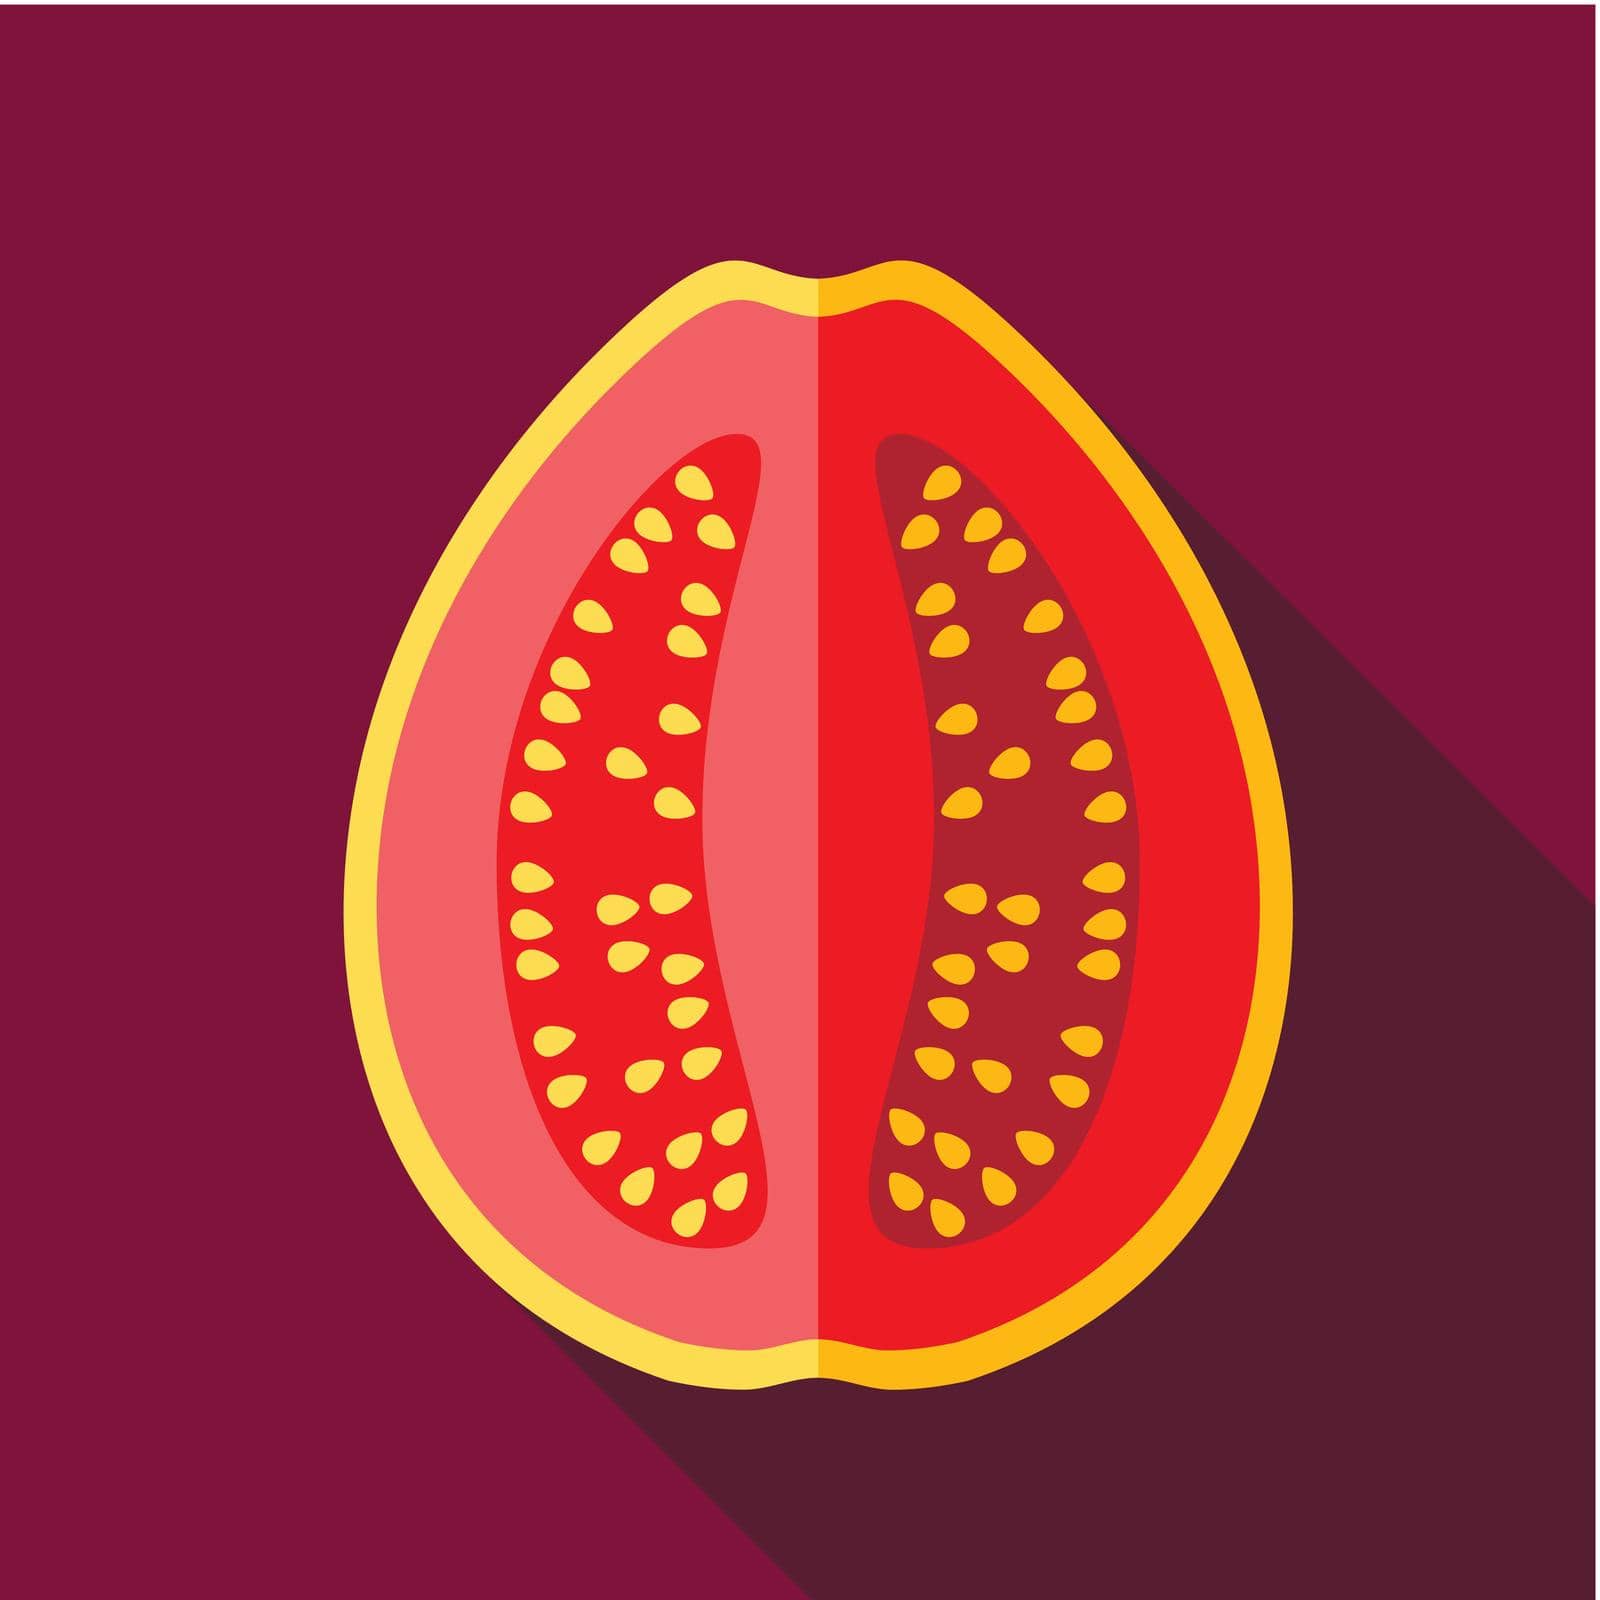 Guava flat icon. Tropical fruit. Vector illustration, eps 10